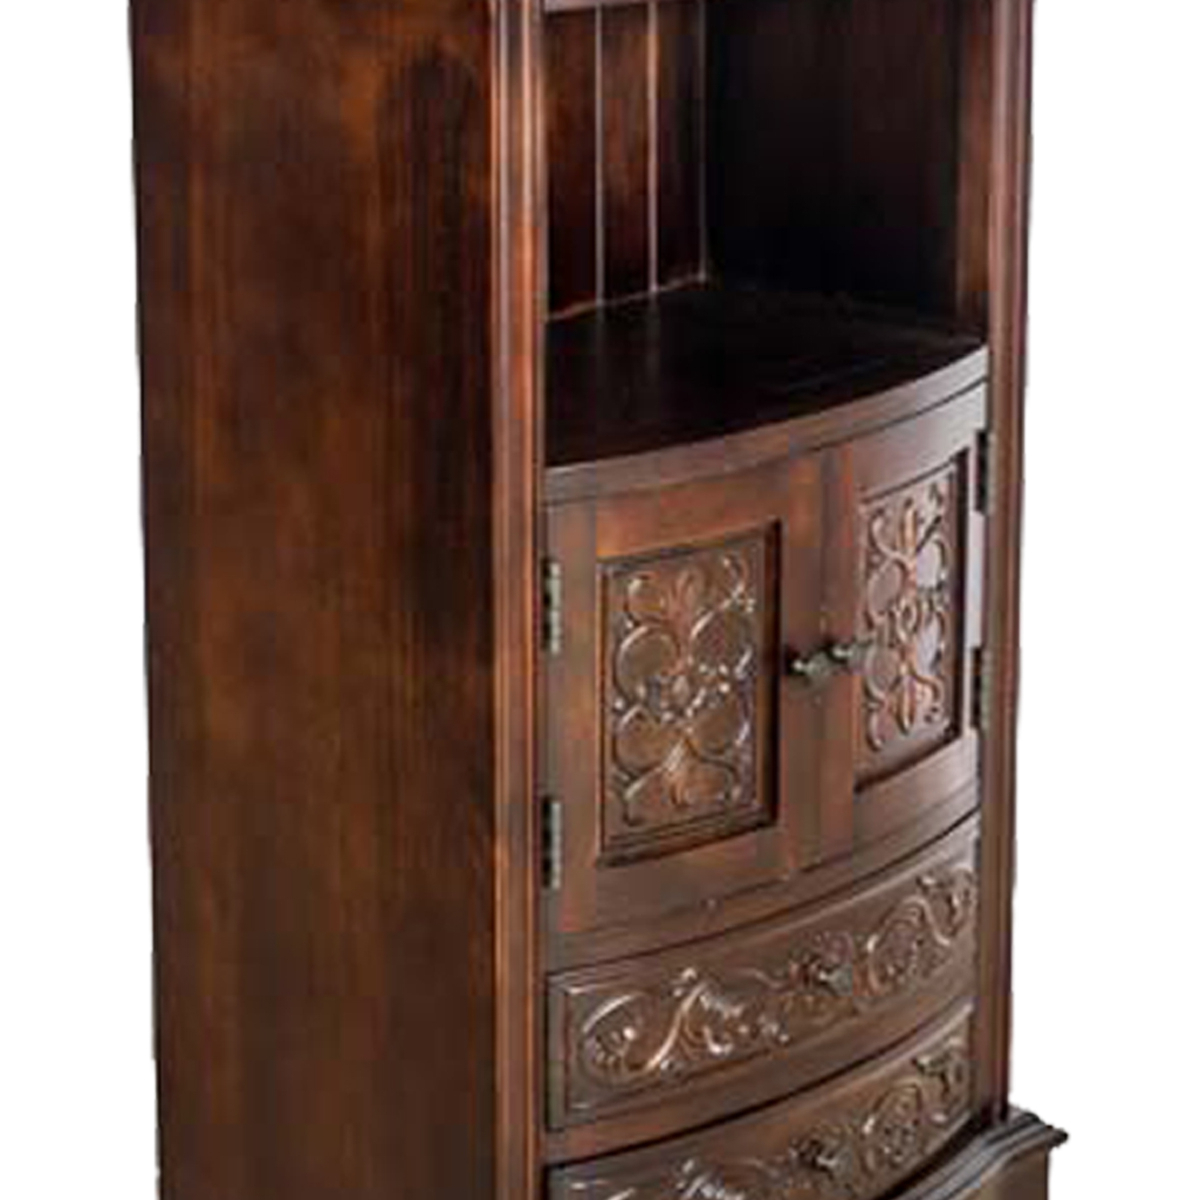 Engraved Wooden Frame Storage Cabinet With 2 Drawers And 2 Doors, Brown- Saltoro Sherpi